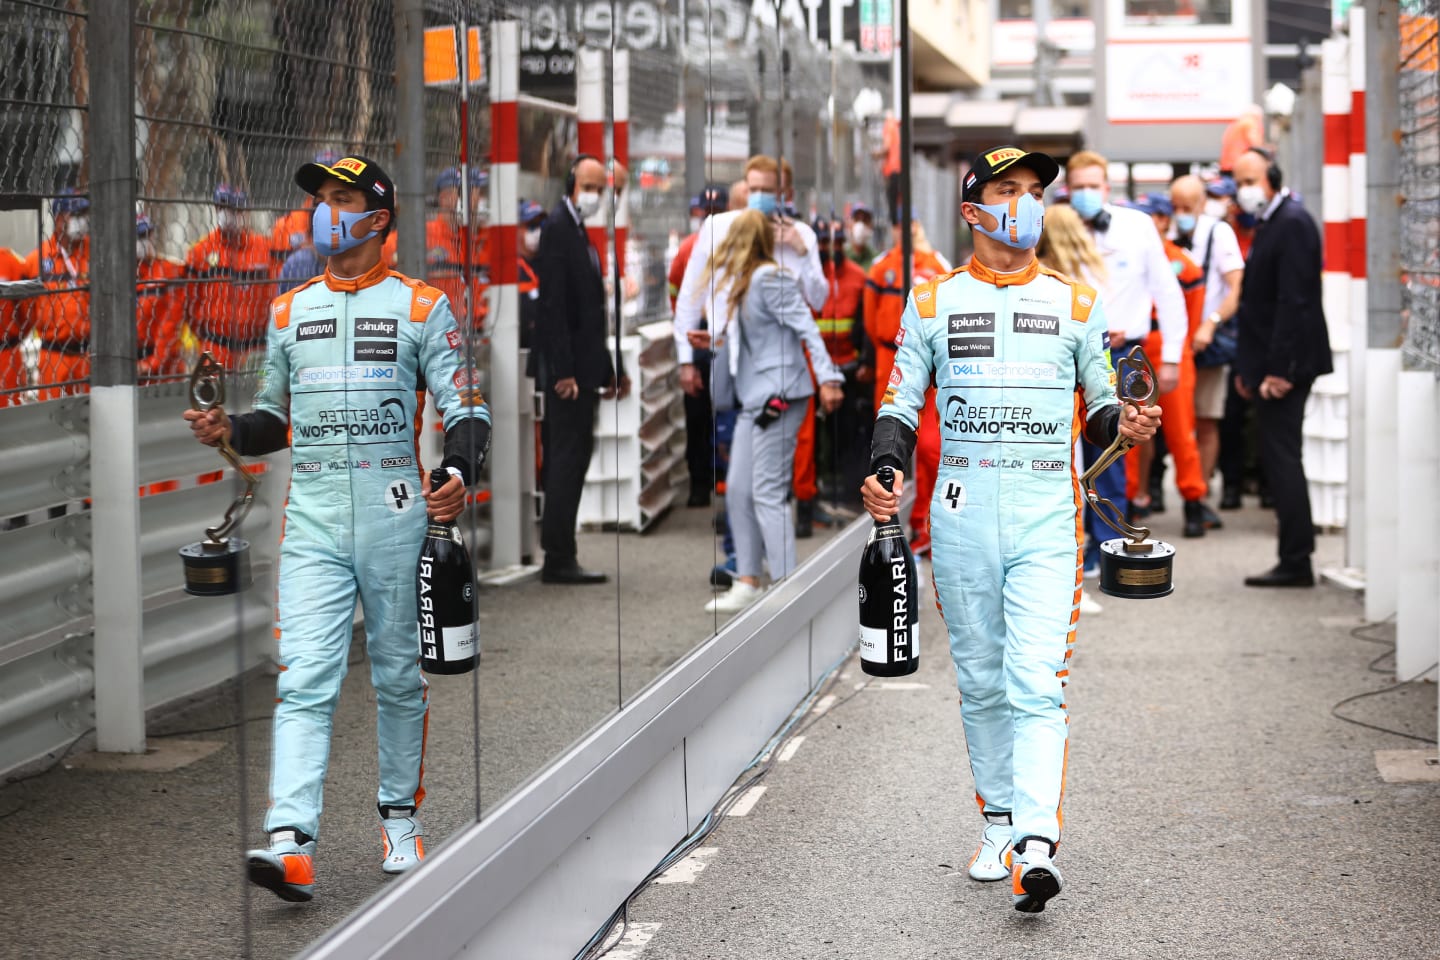 MONTE-CARLO, MONACO - MAY 23: Third placed Lando Norris of Great Britain and McLaren F1 walks in parc ferme after the F1 Grand Prix of Monaco at Circuit de Monaco on May 23, 2021 in Monte-Carlo, Monaco. (Photo by Bryn Lennon/Getty Images)